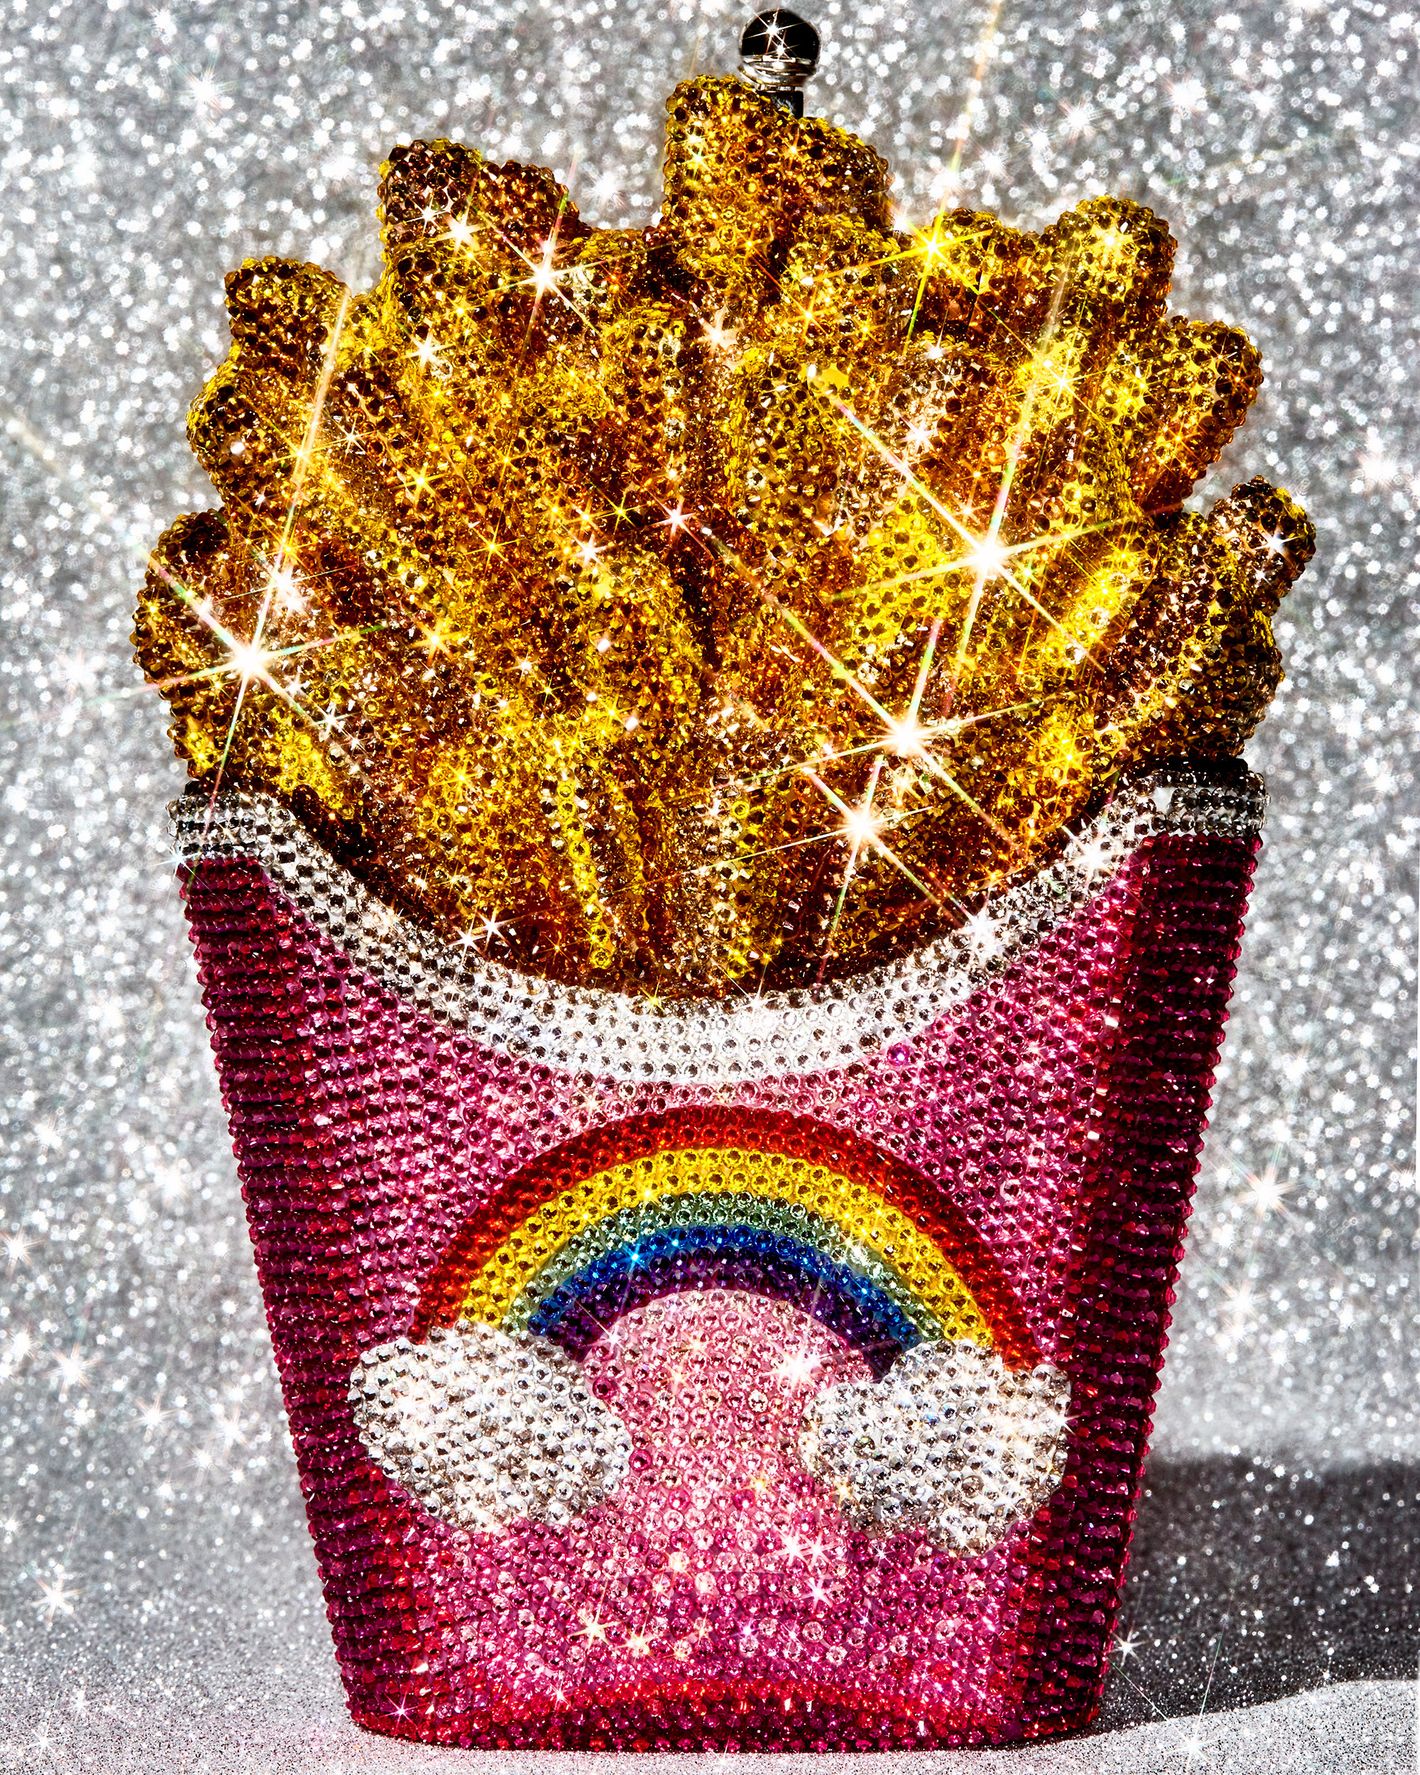 French Fries Bag  Judith Leiber French Fries Rainbow Clutch Bag